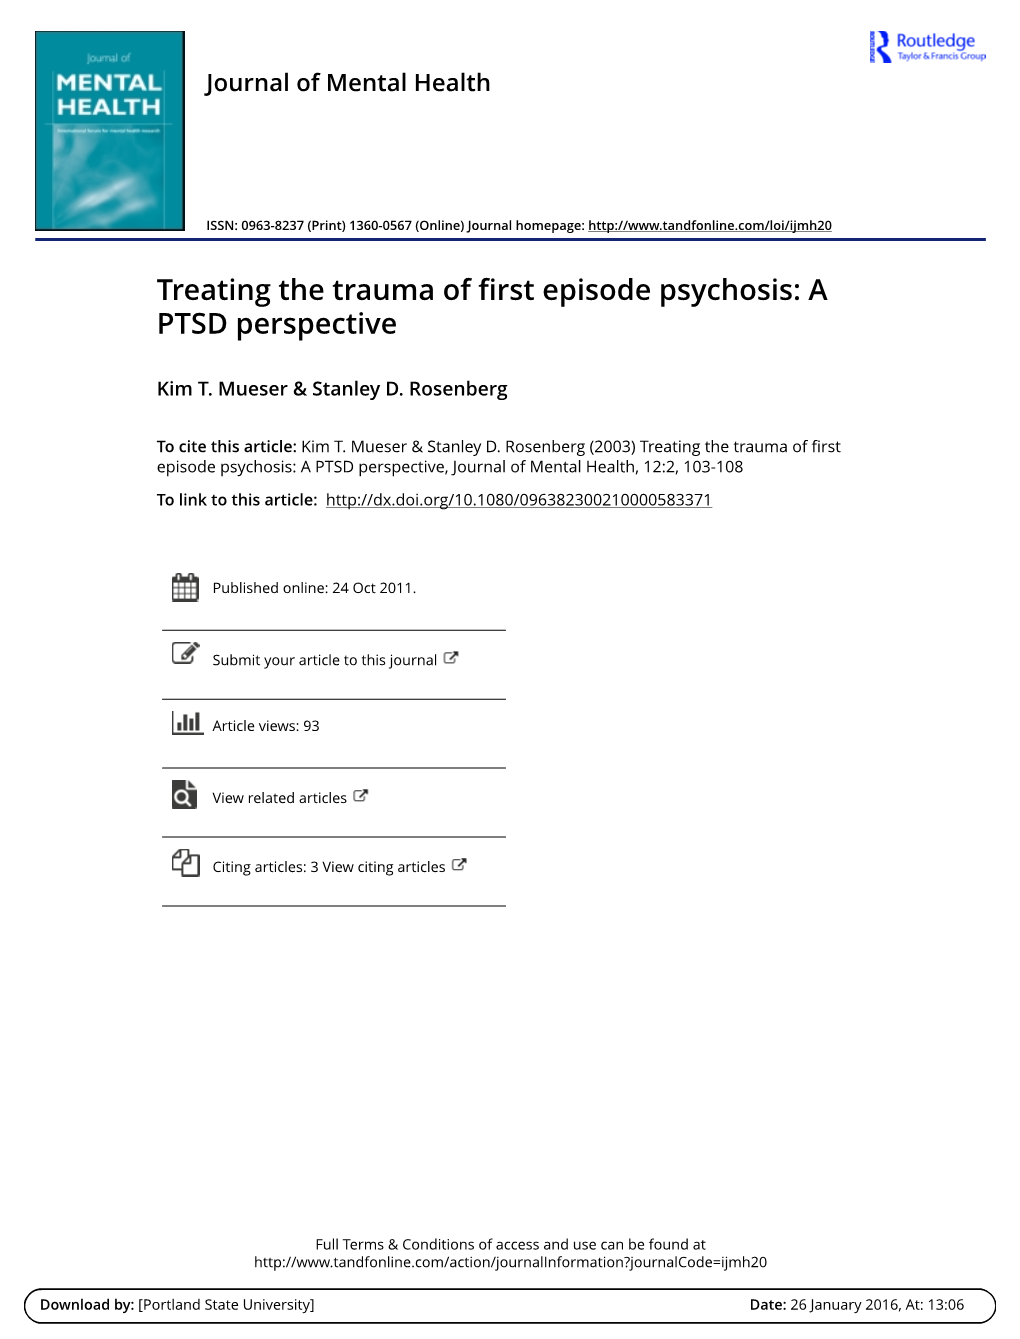 Treating the Trauma of First Episode Psychosis: a PTSD Perspective